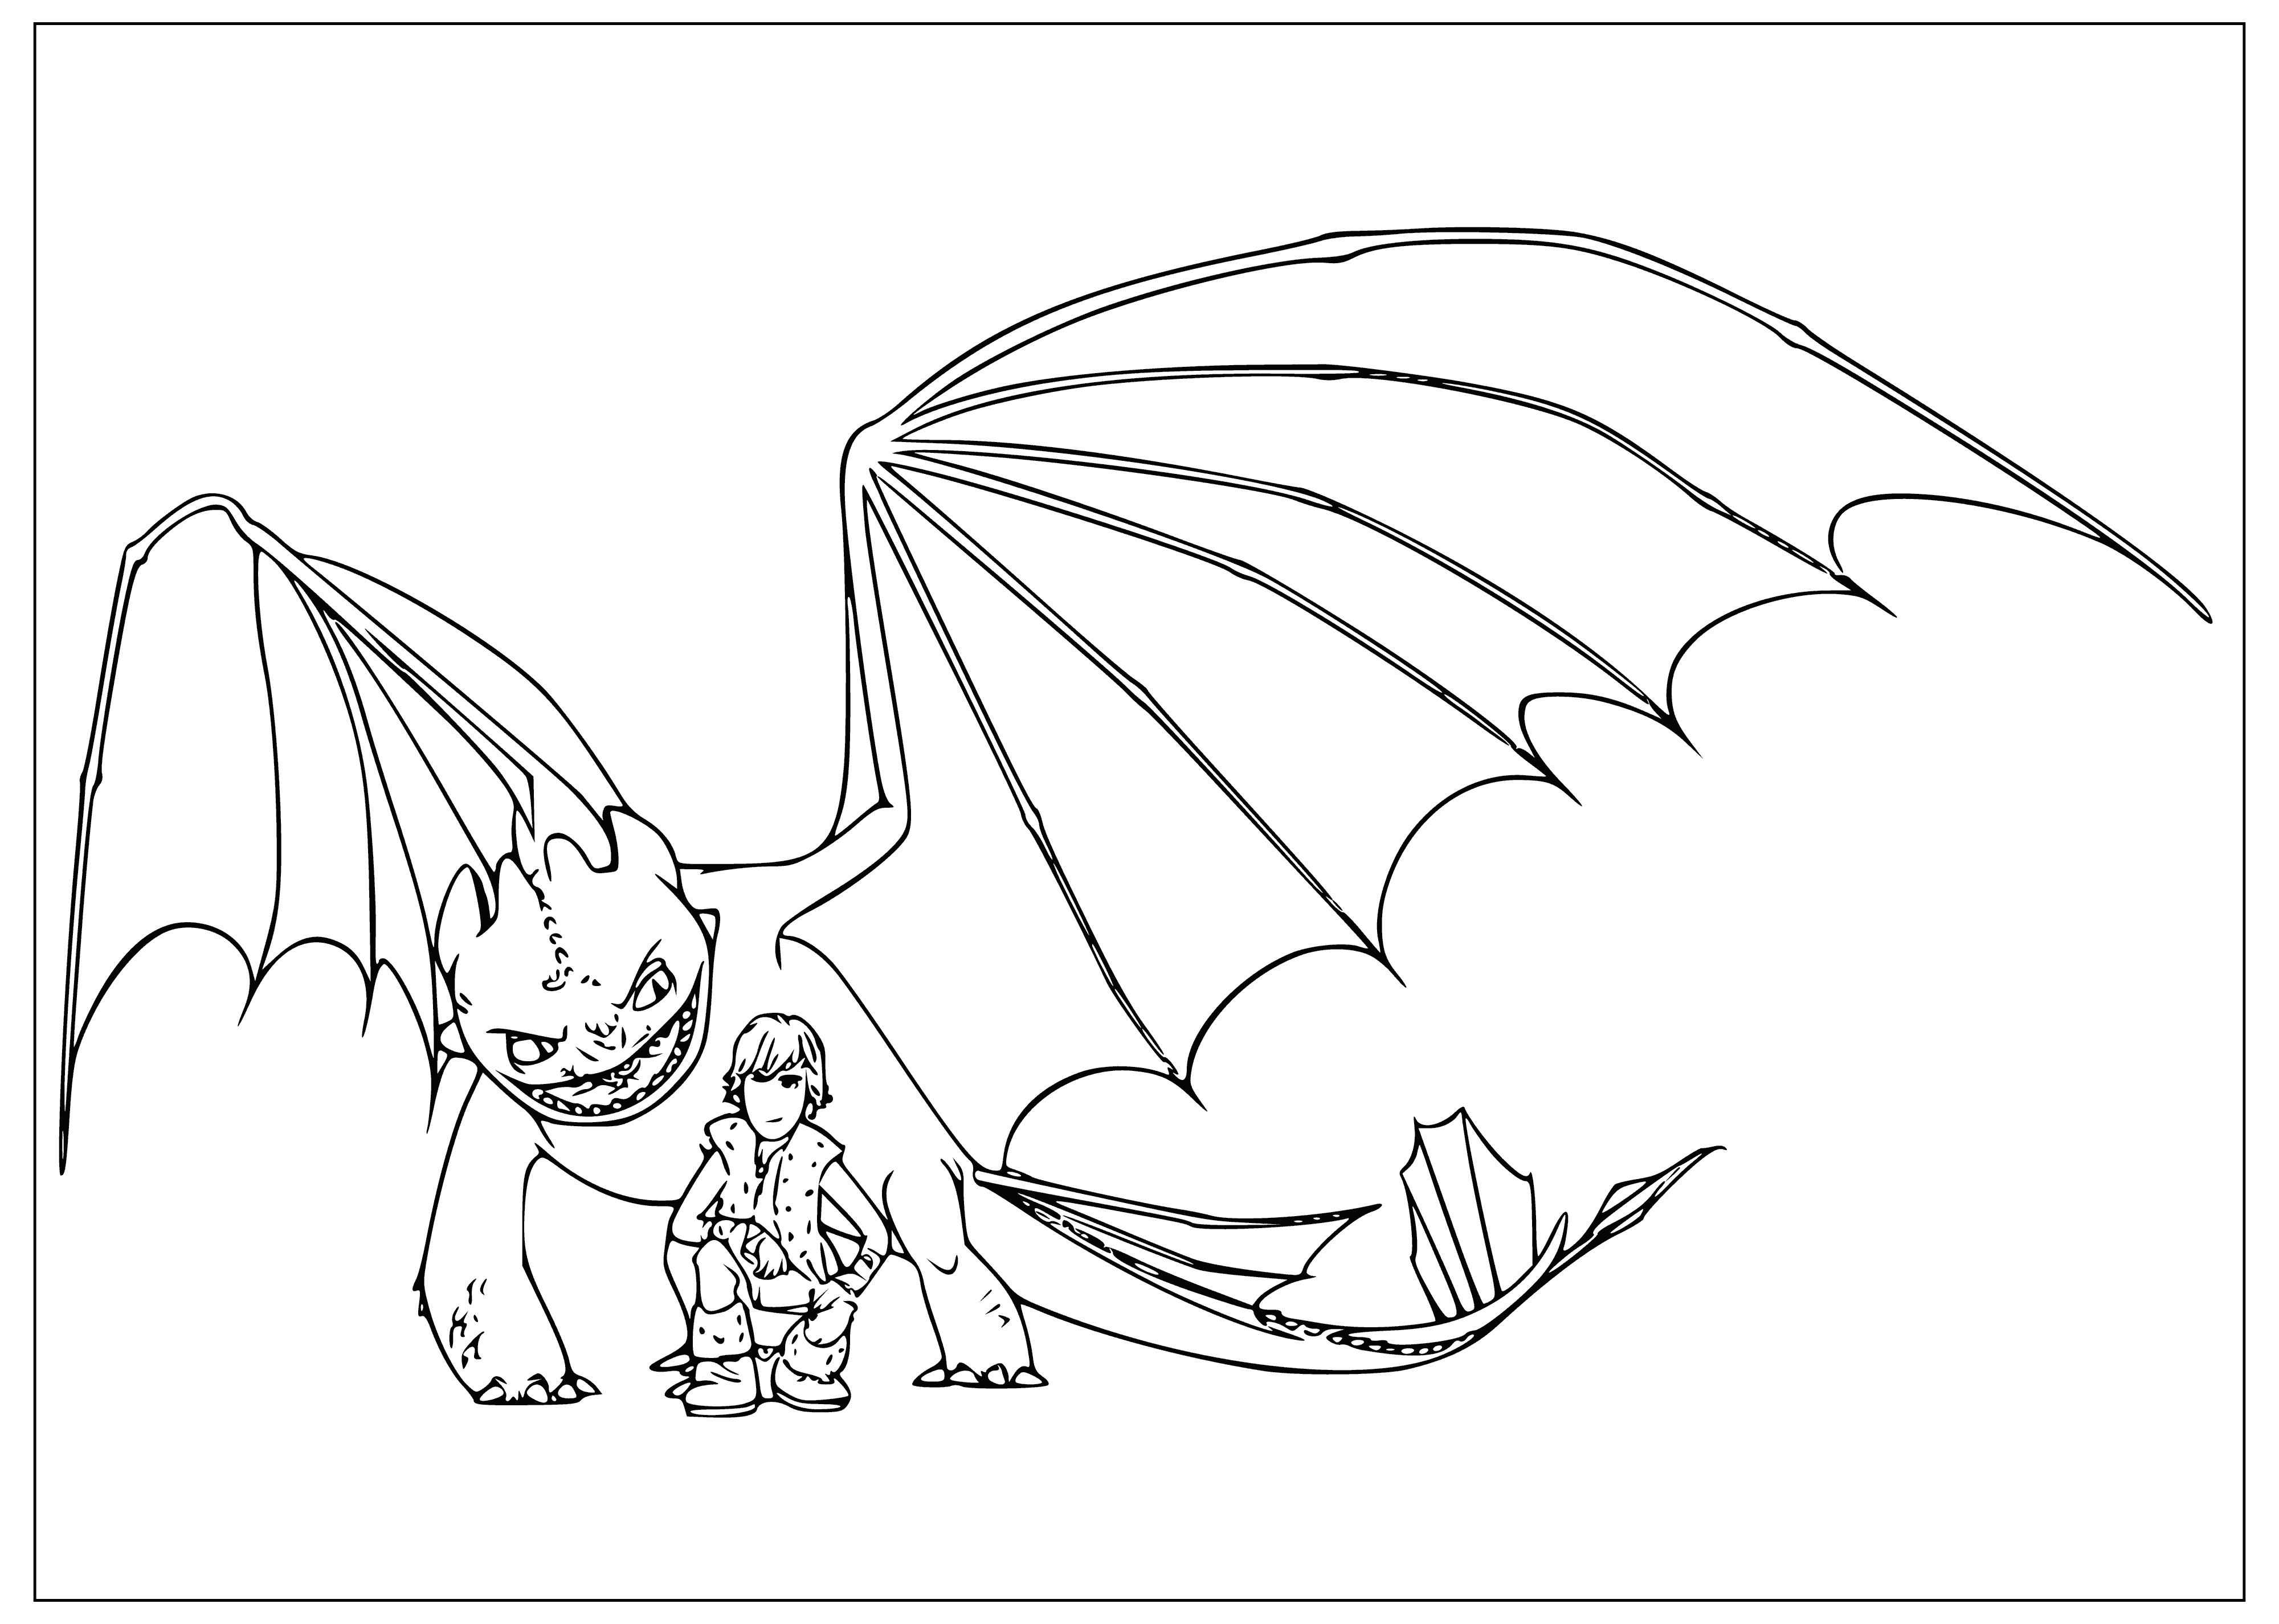 coloring page: Young Bezzubik cuddles with pet dragon Ikking on stormy night, but Ikking is wide-awake, staring intently out the window.